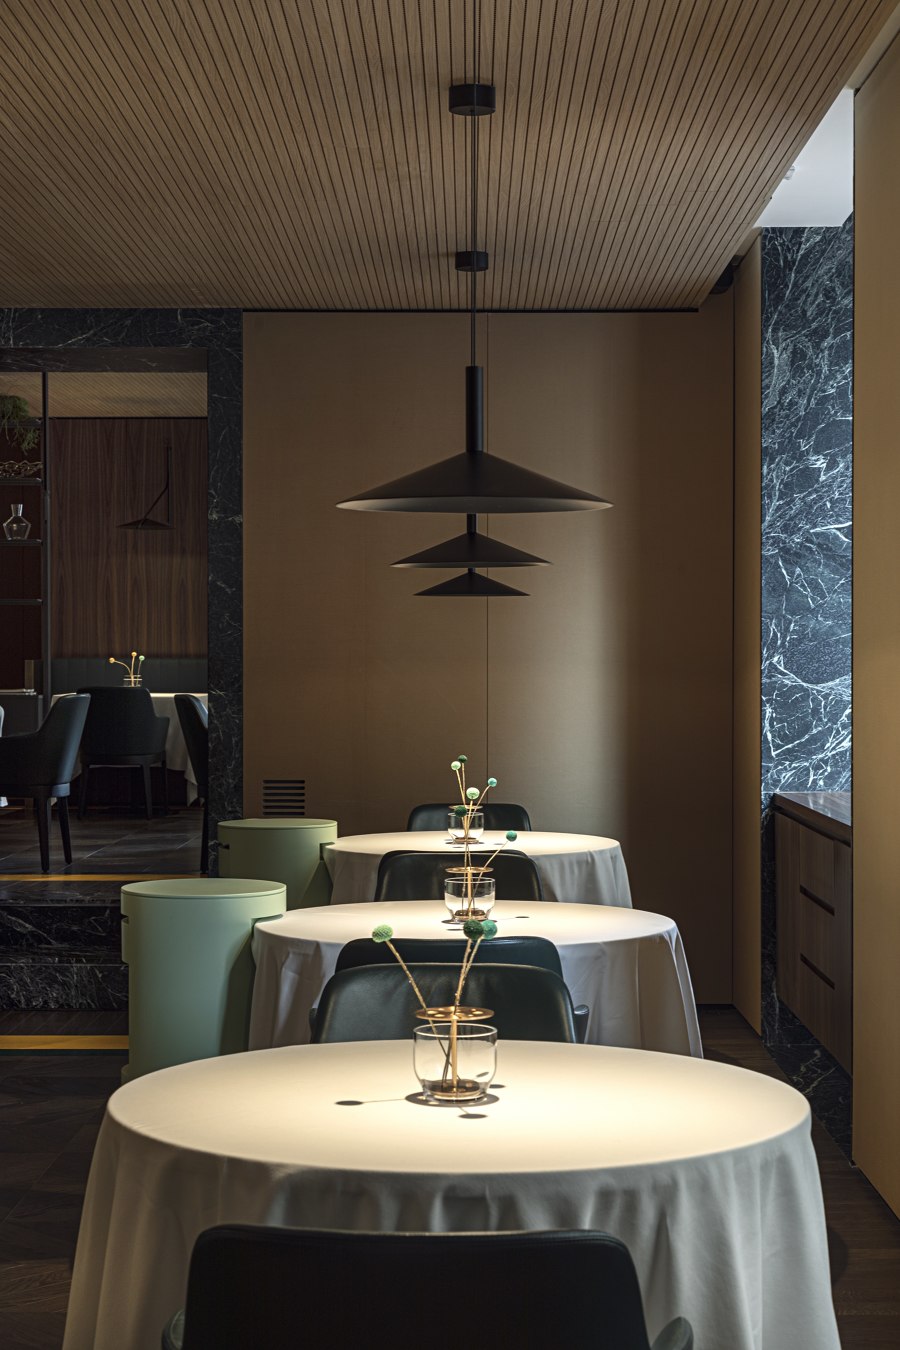 Aria by FADD Architects | Restaurant interiors